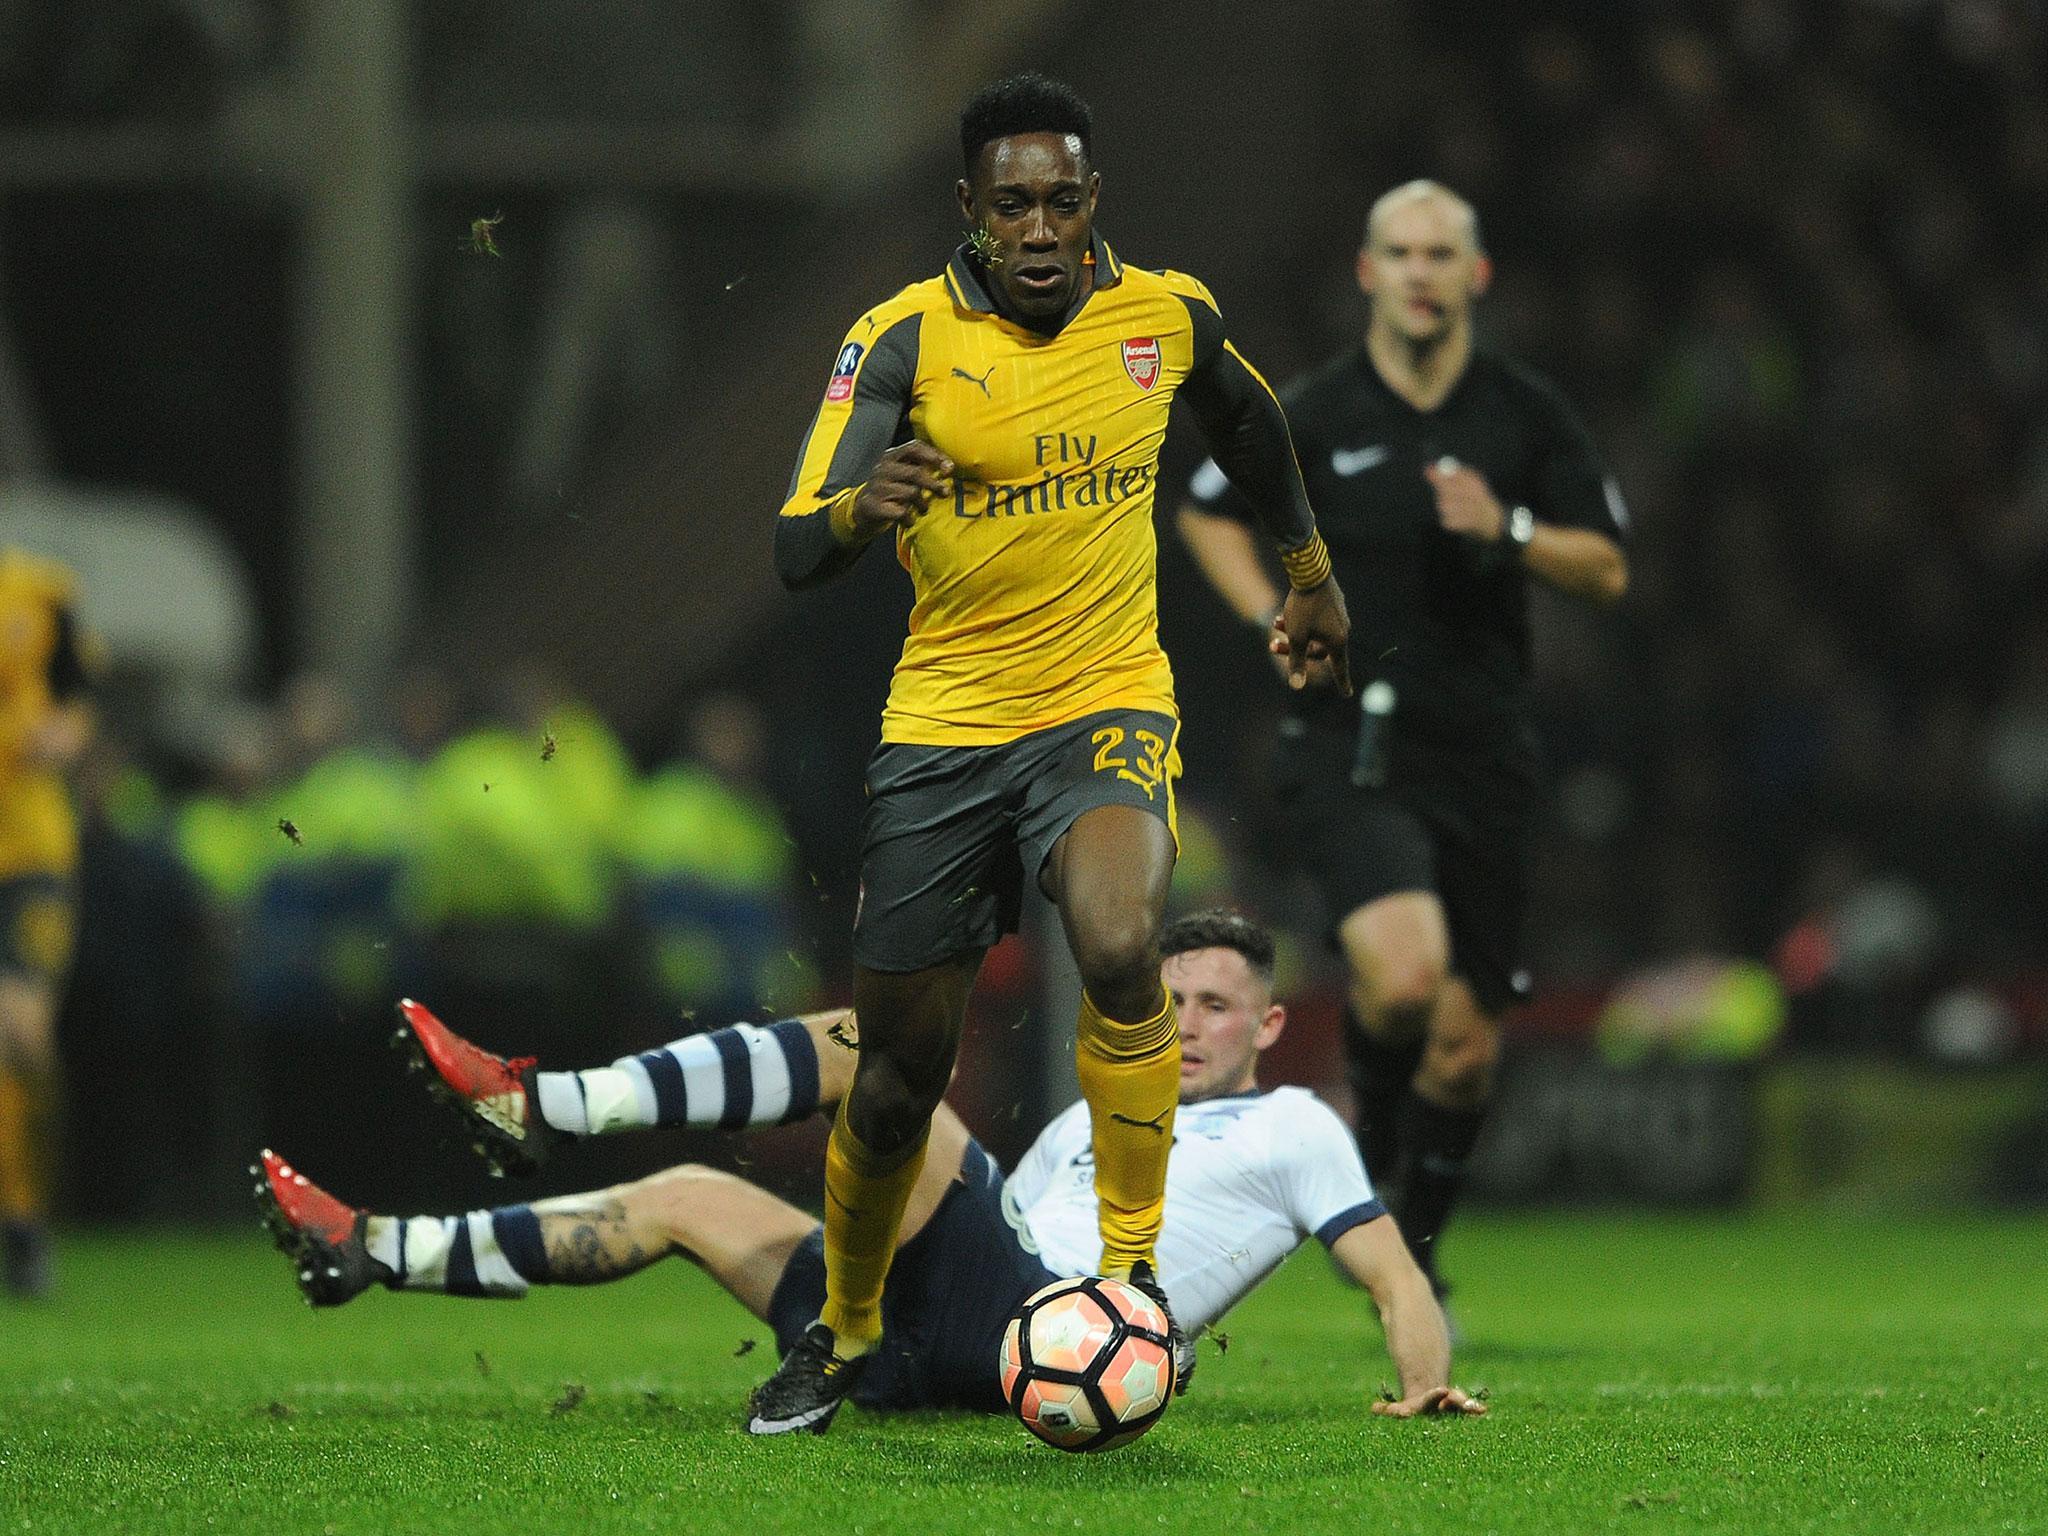 Welbeck saw a late shot fizz over the bar after skipping past Preston's Alan Browne